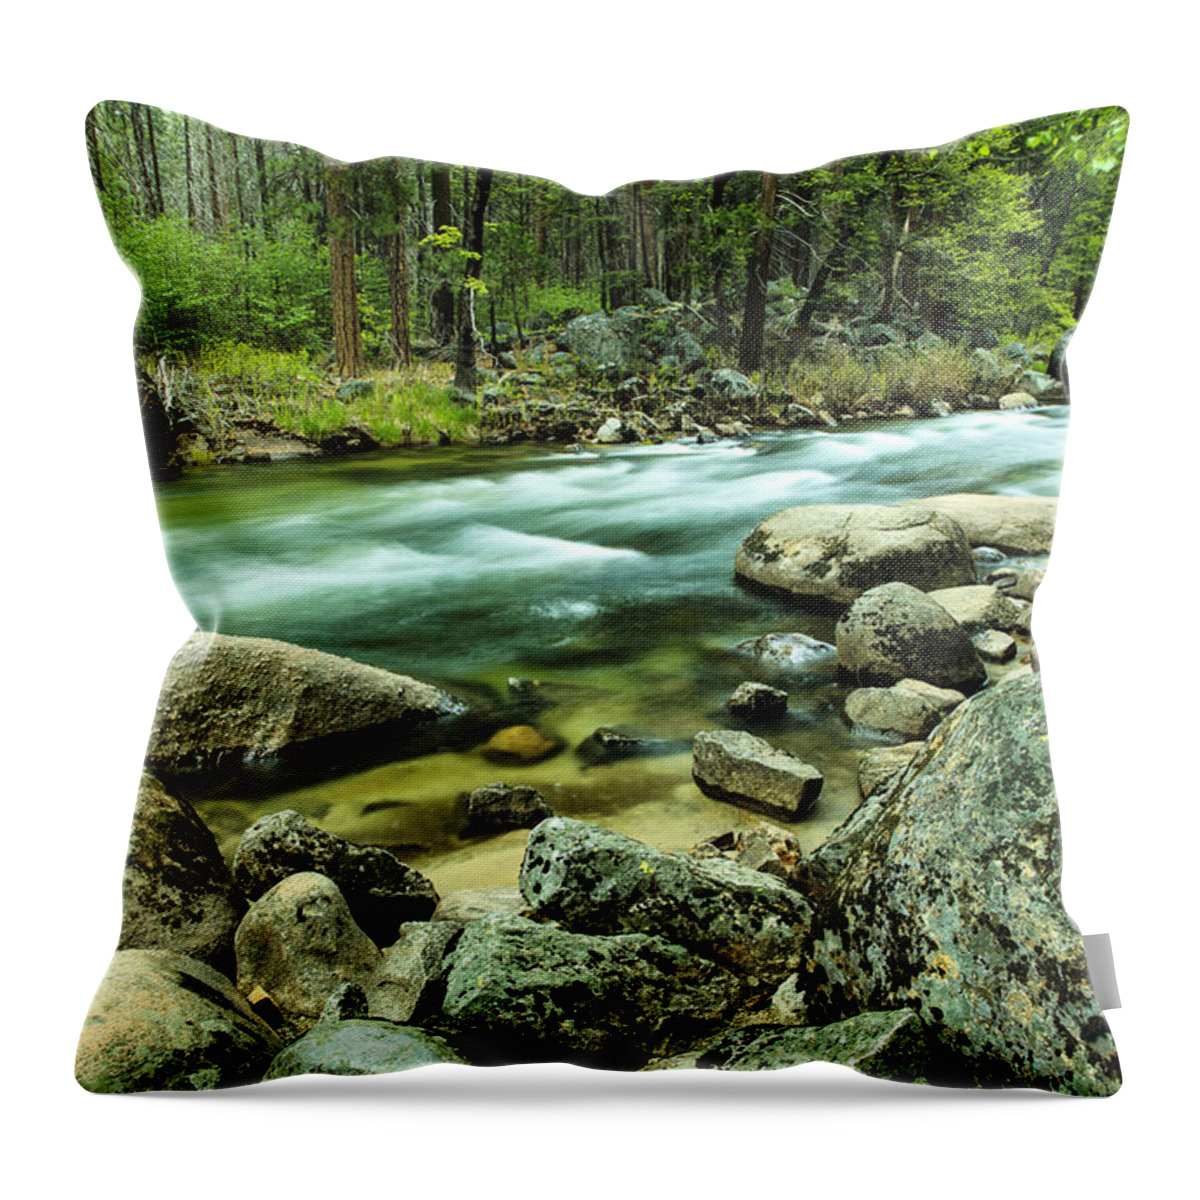 Yosemite Throw Pillow featuring the photograph Merced River Yosemite by Ben Graham